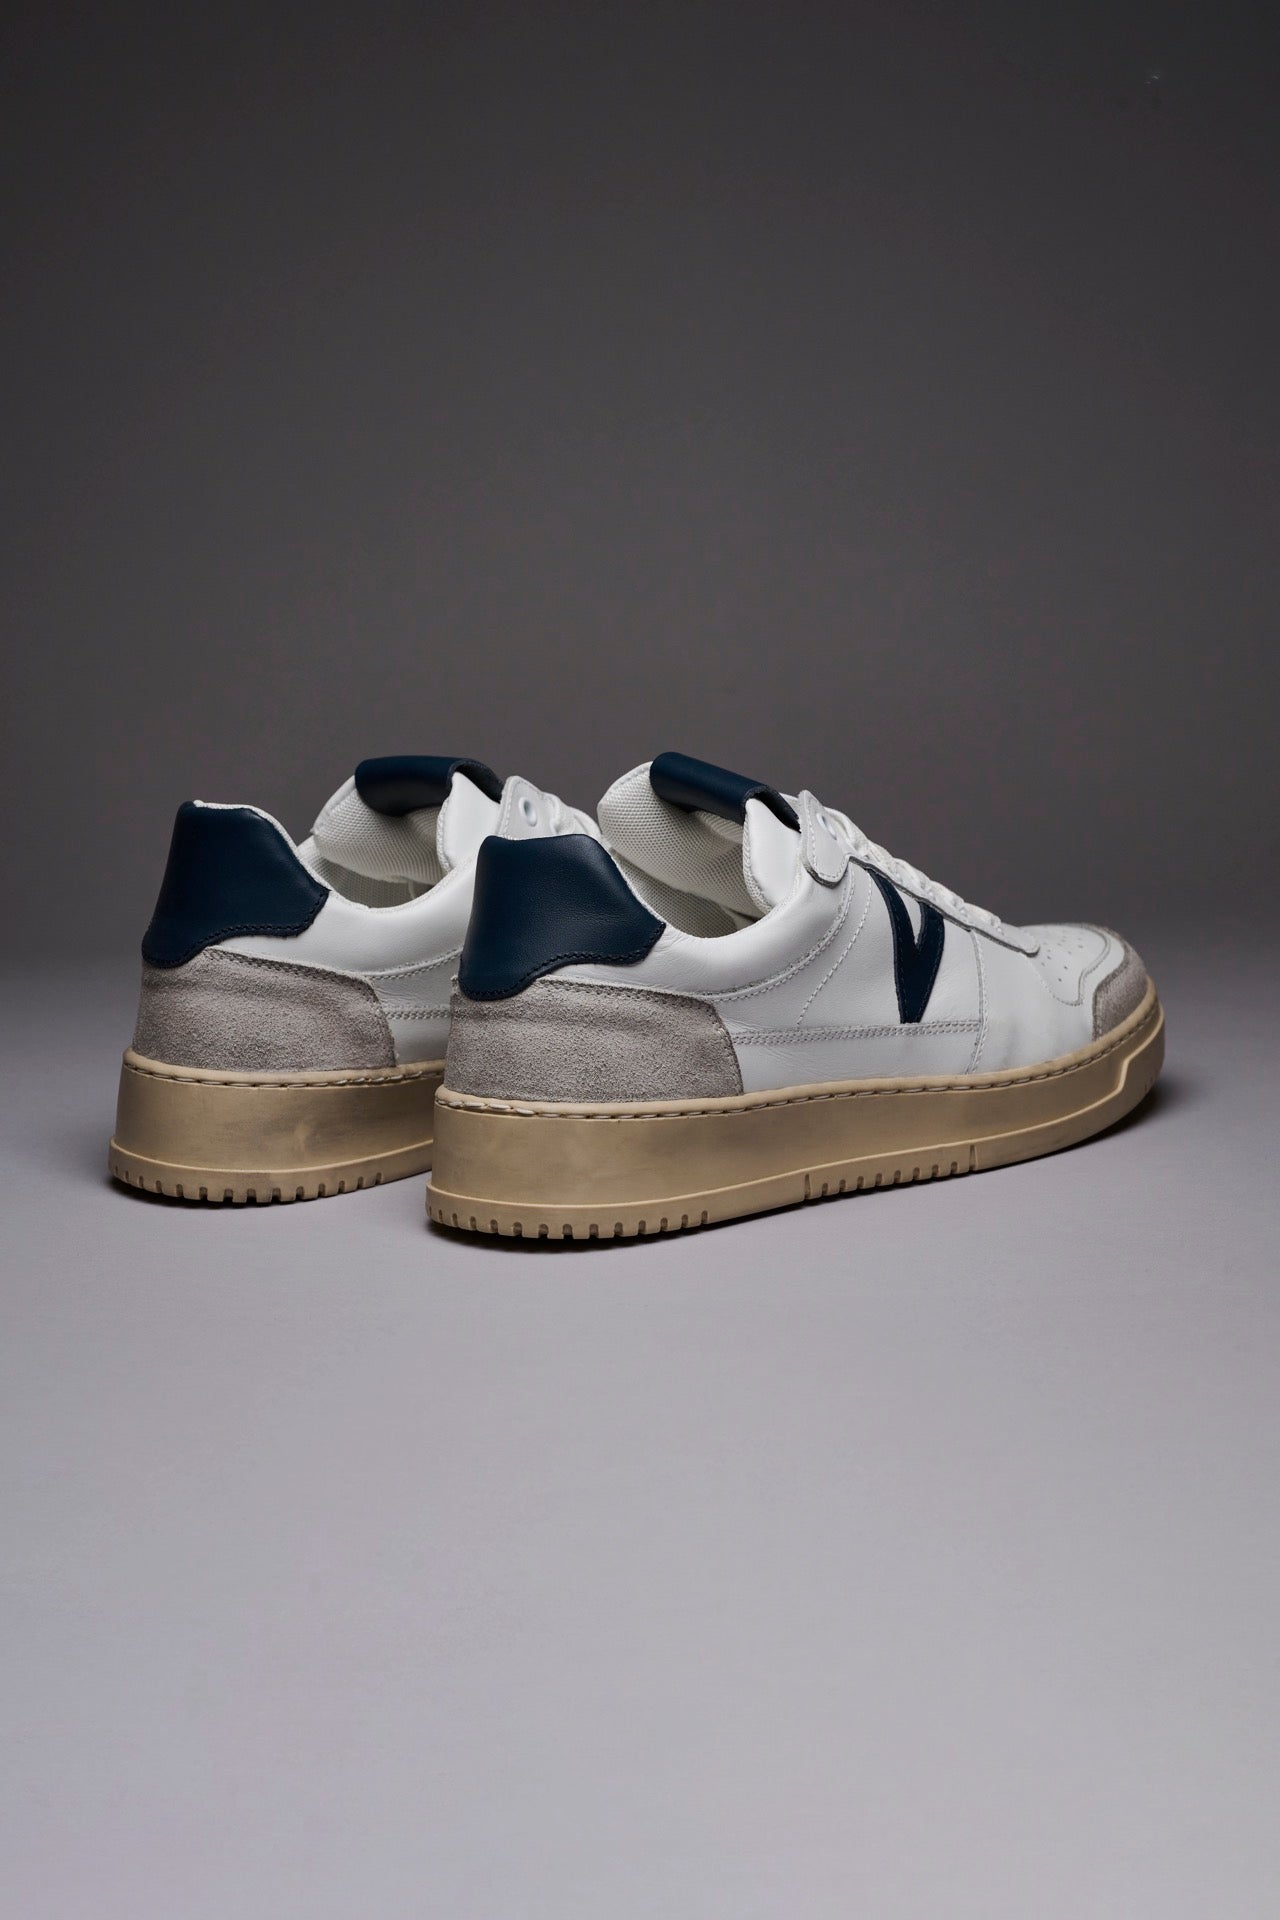 COLLEGE - White Sneakers with Blue back and insert